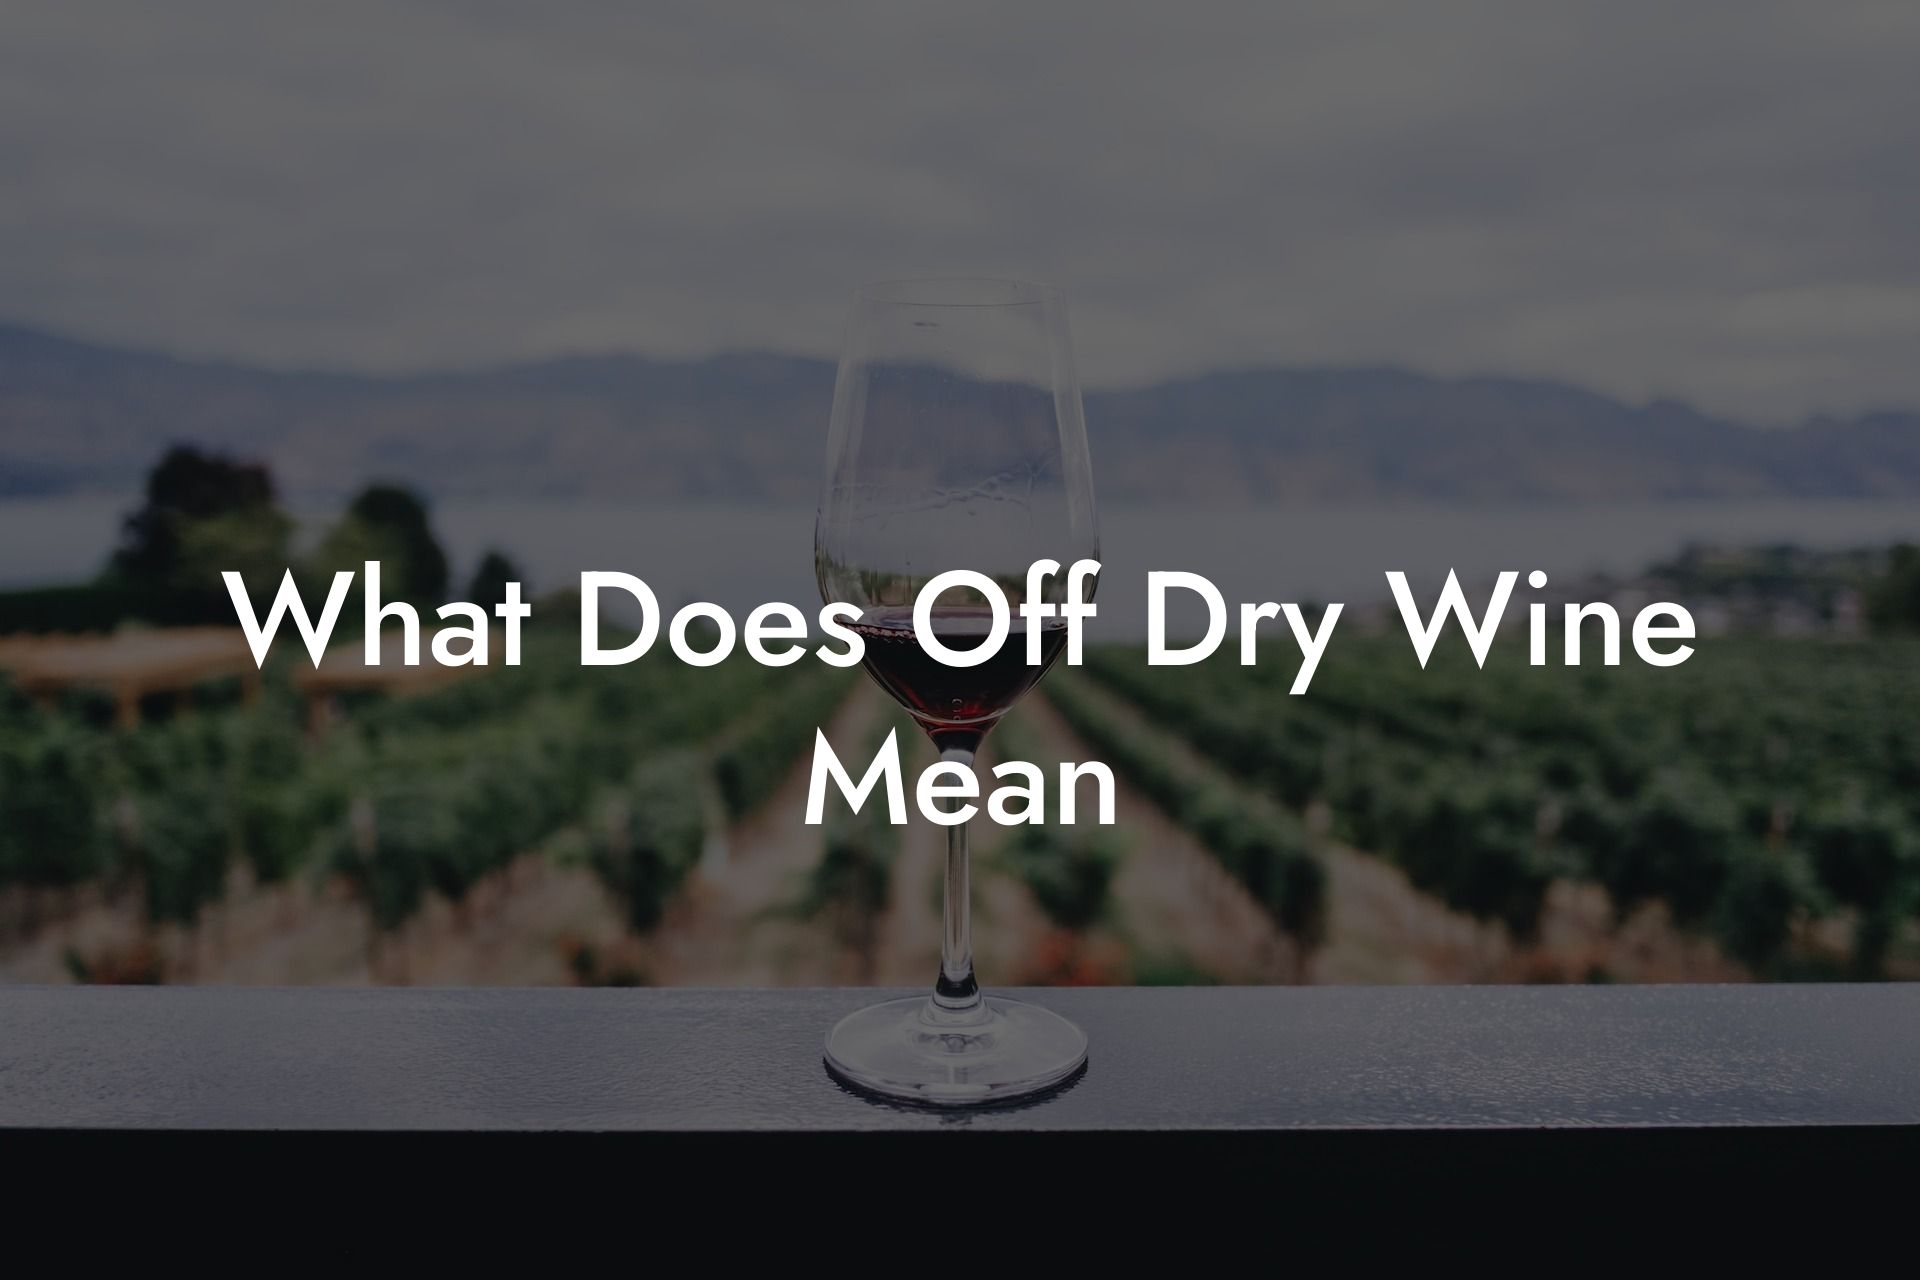 What Does Off Dry Wine Mean